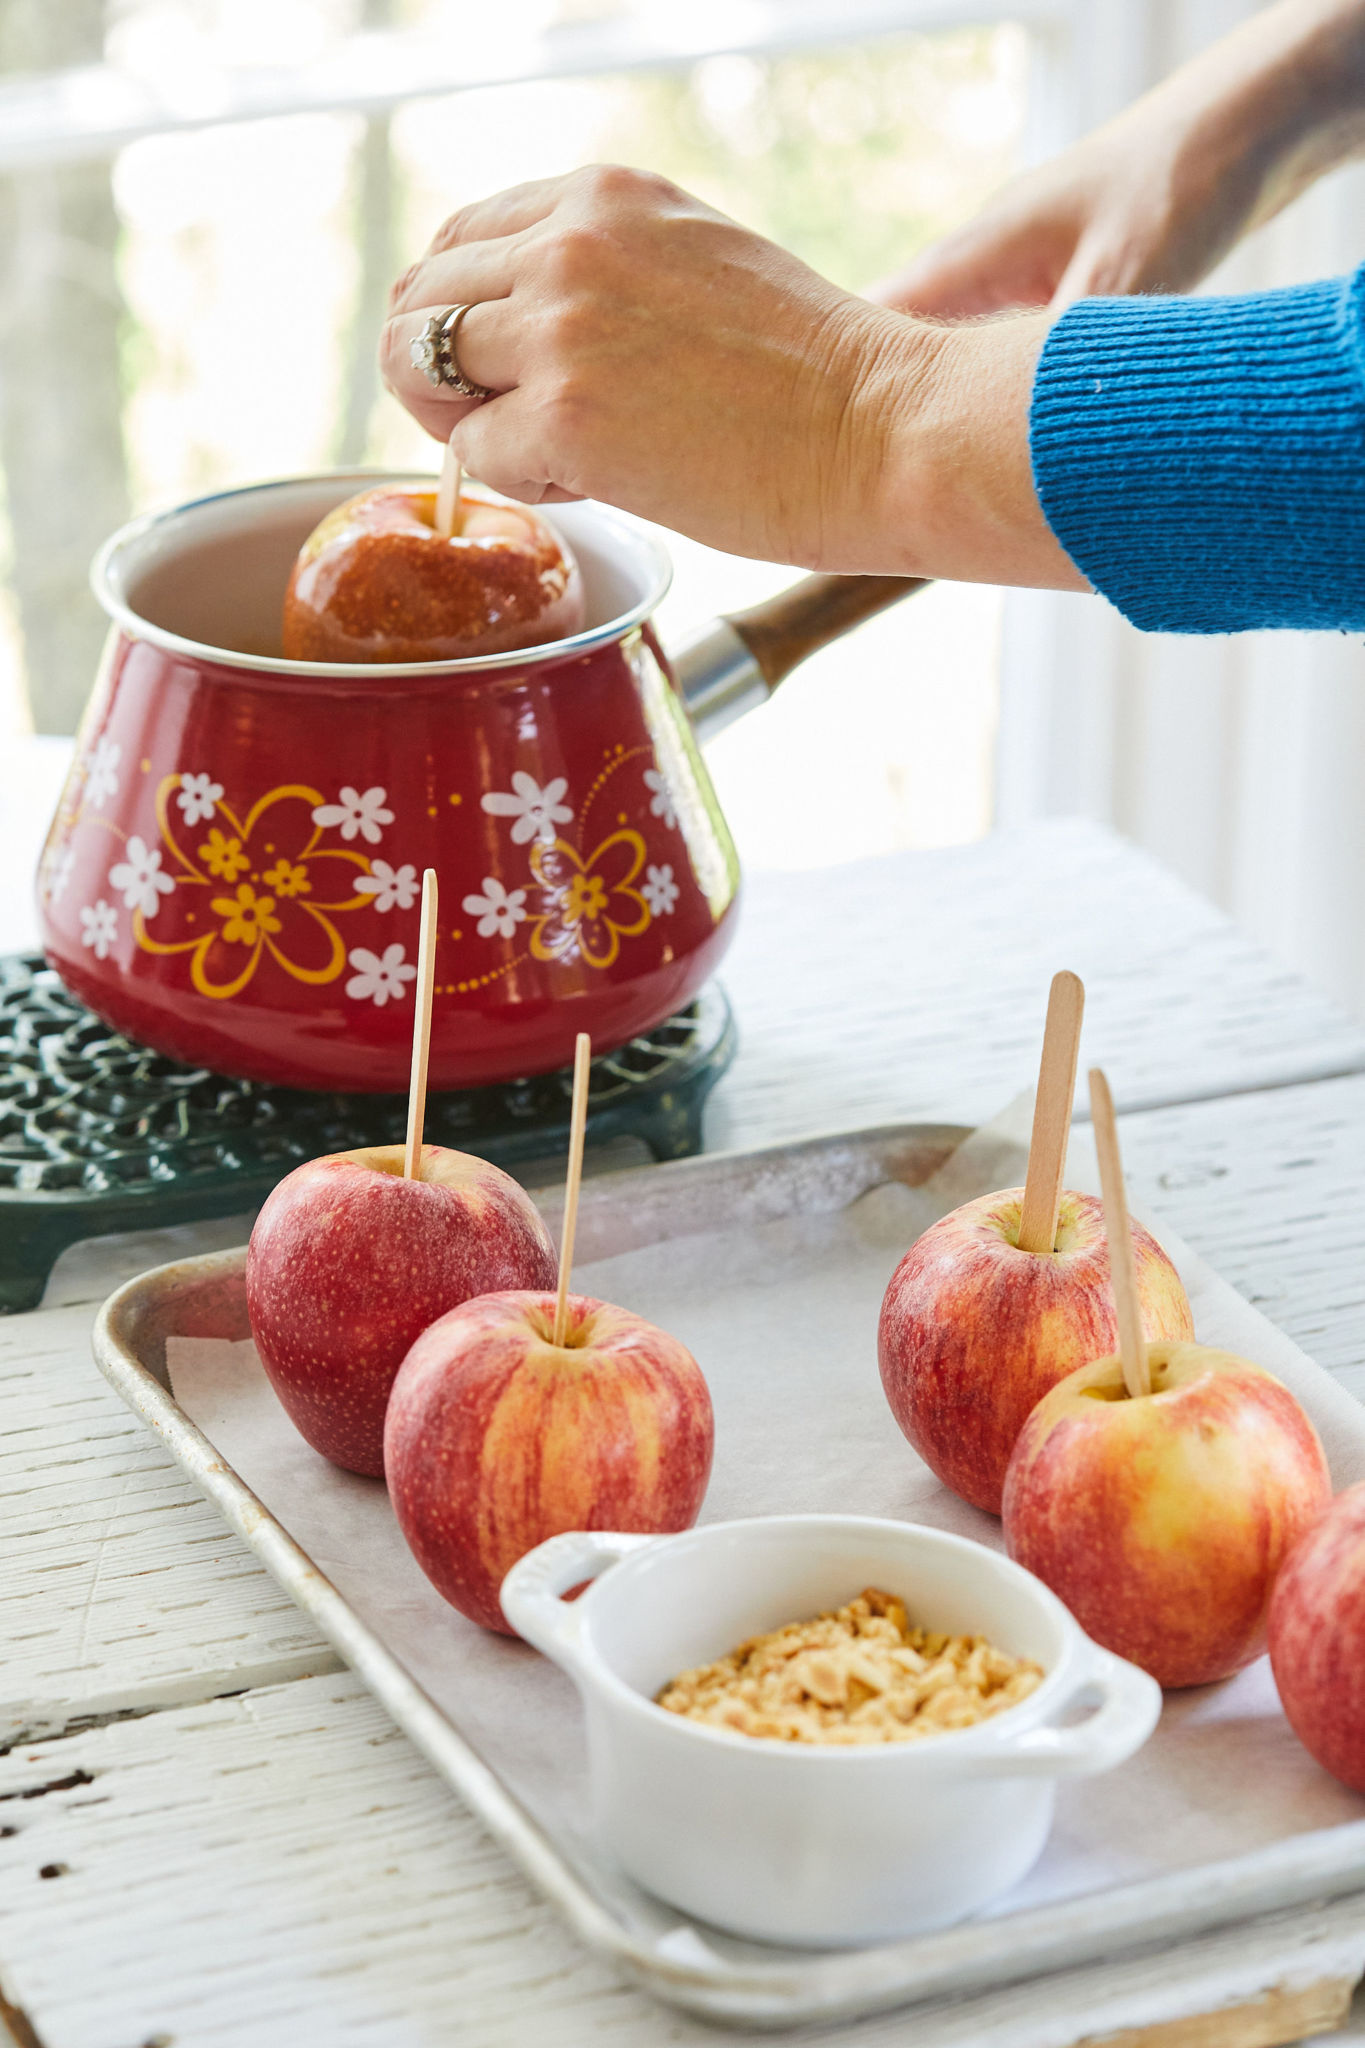 A tray of apples ready to dip into caramel.